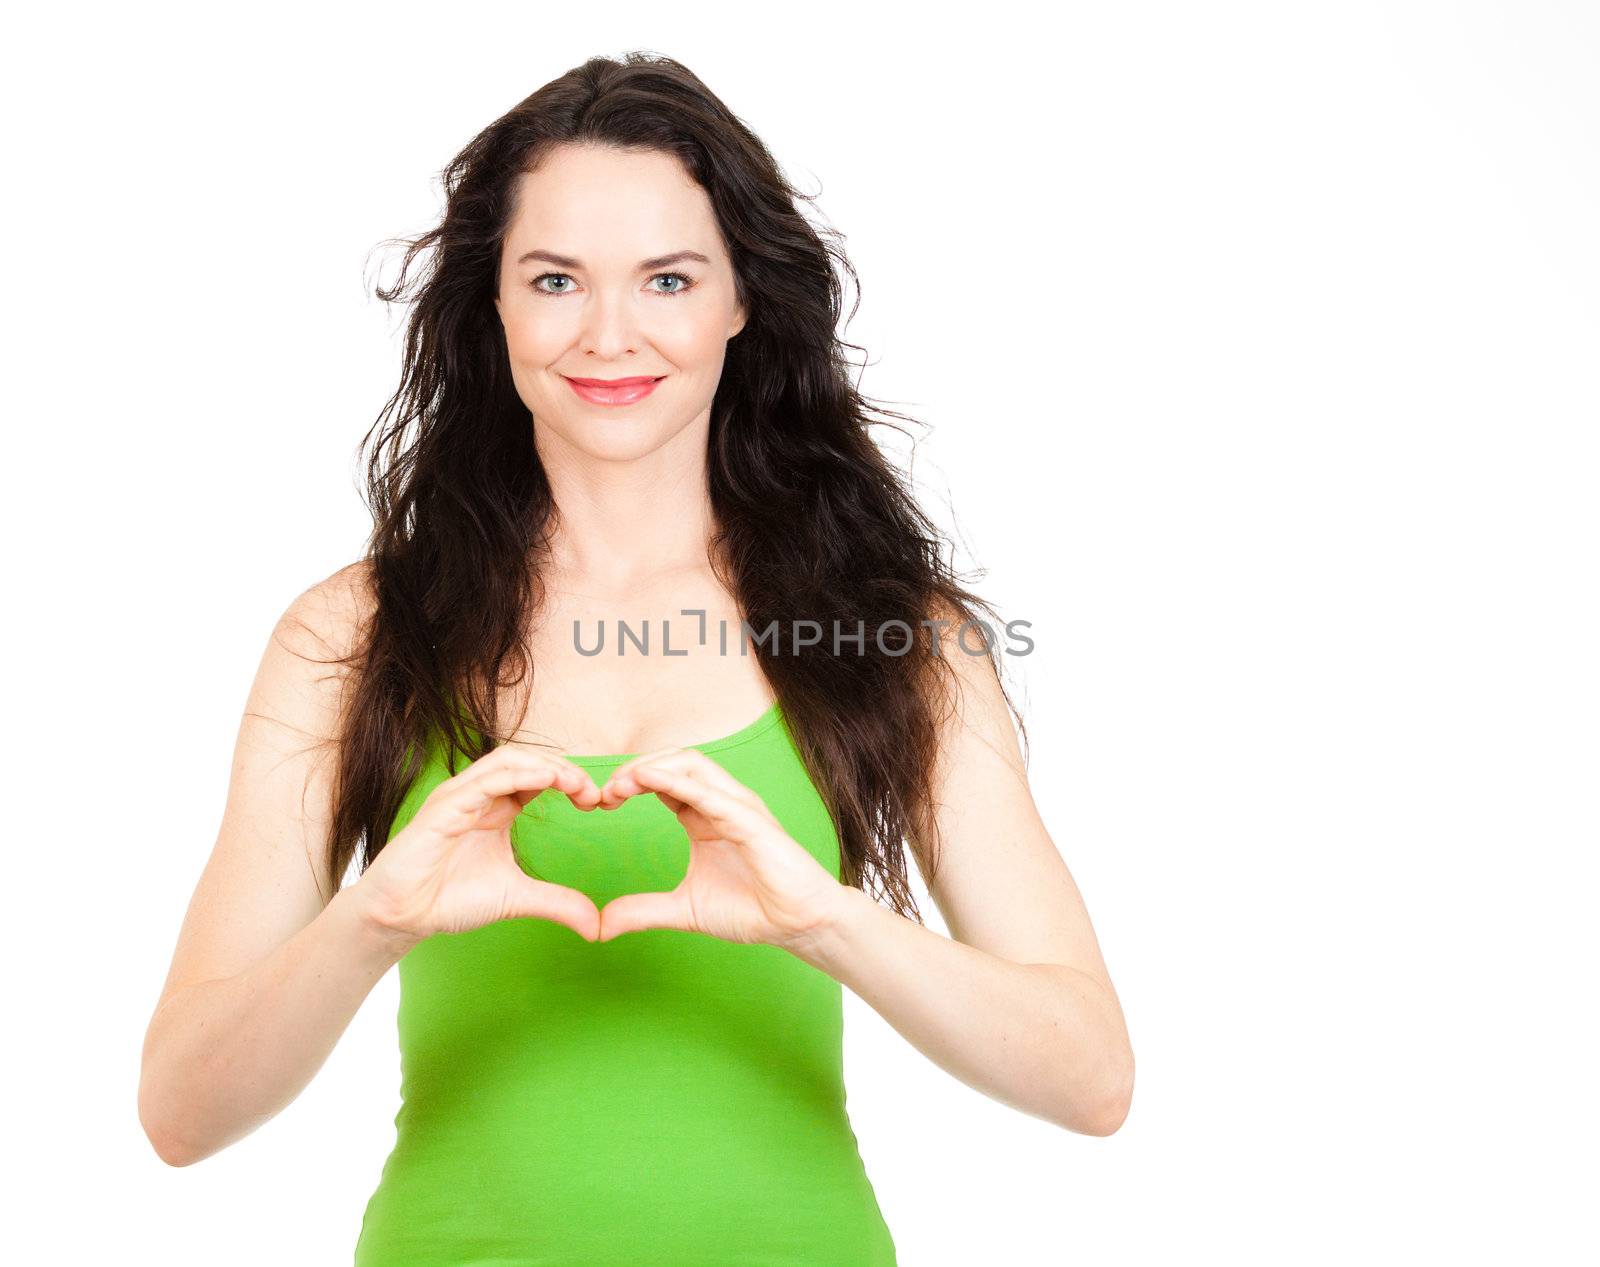 Beautiful young woman symboling a love heart with hands. Isolated over white.